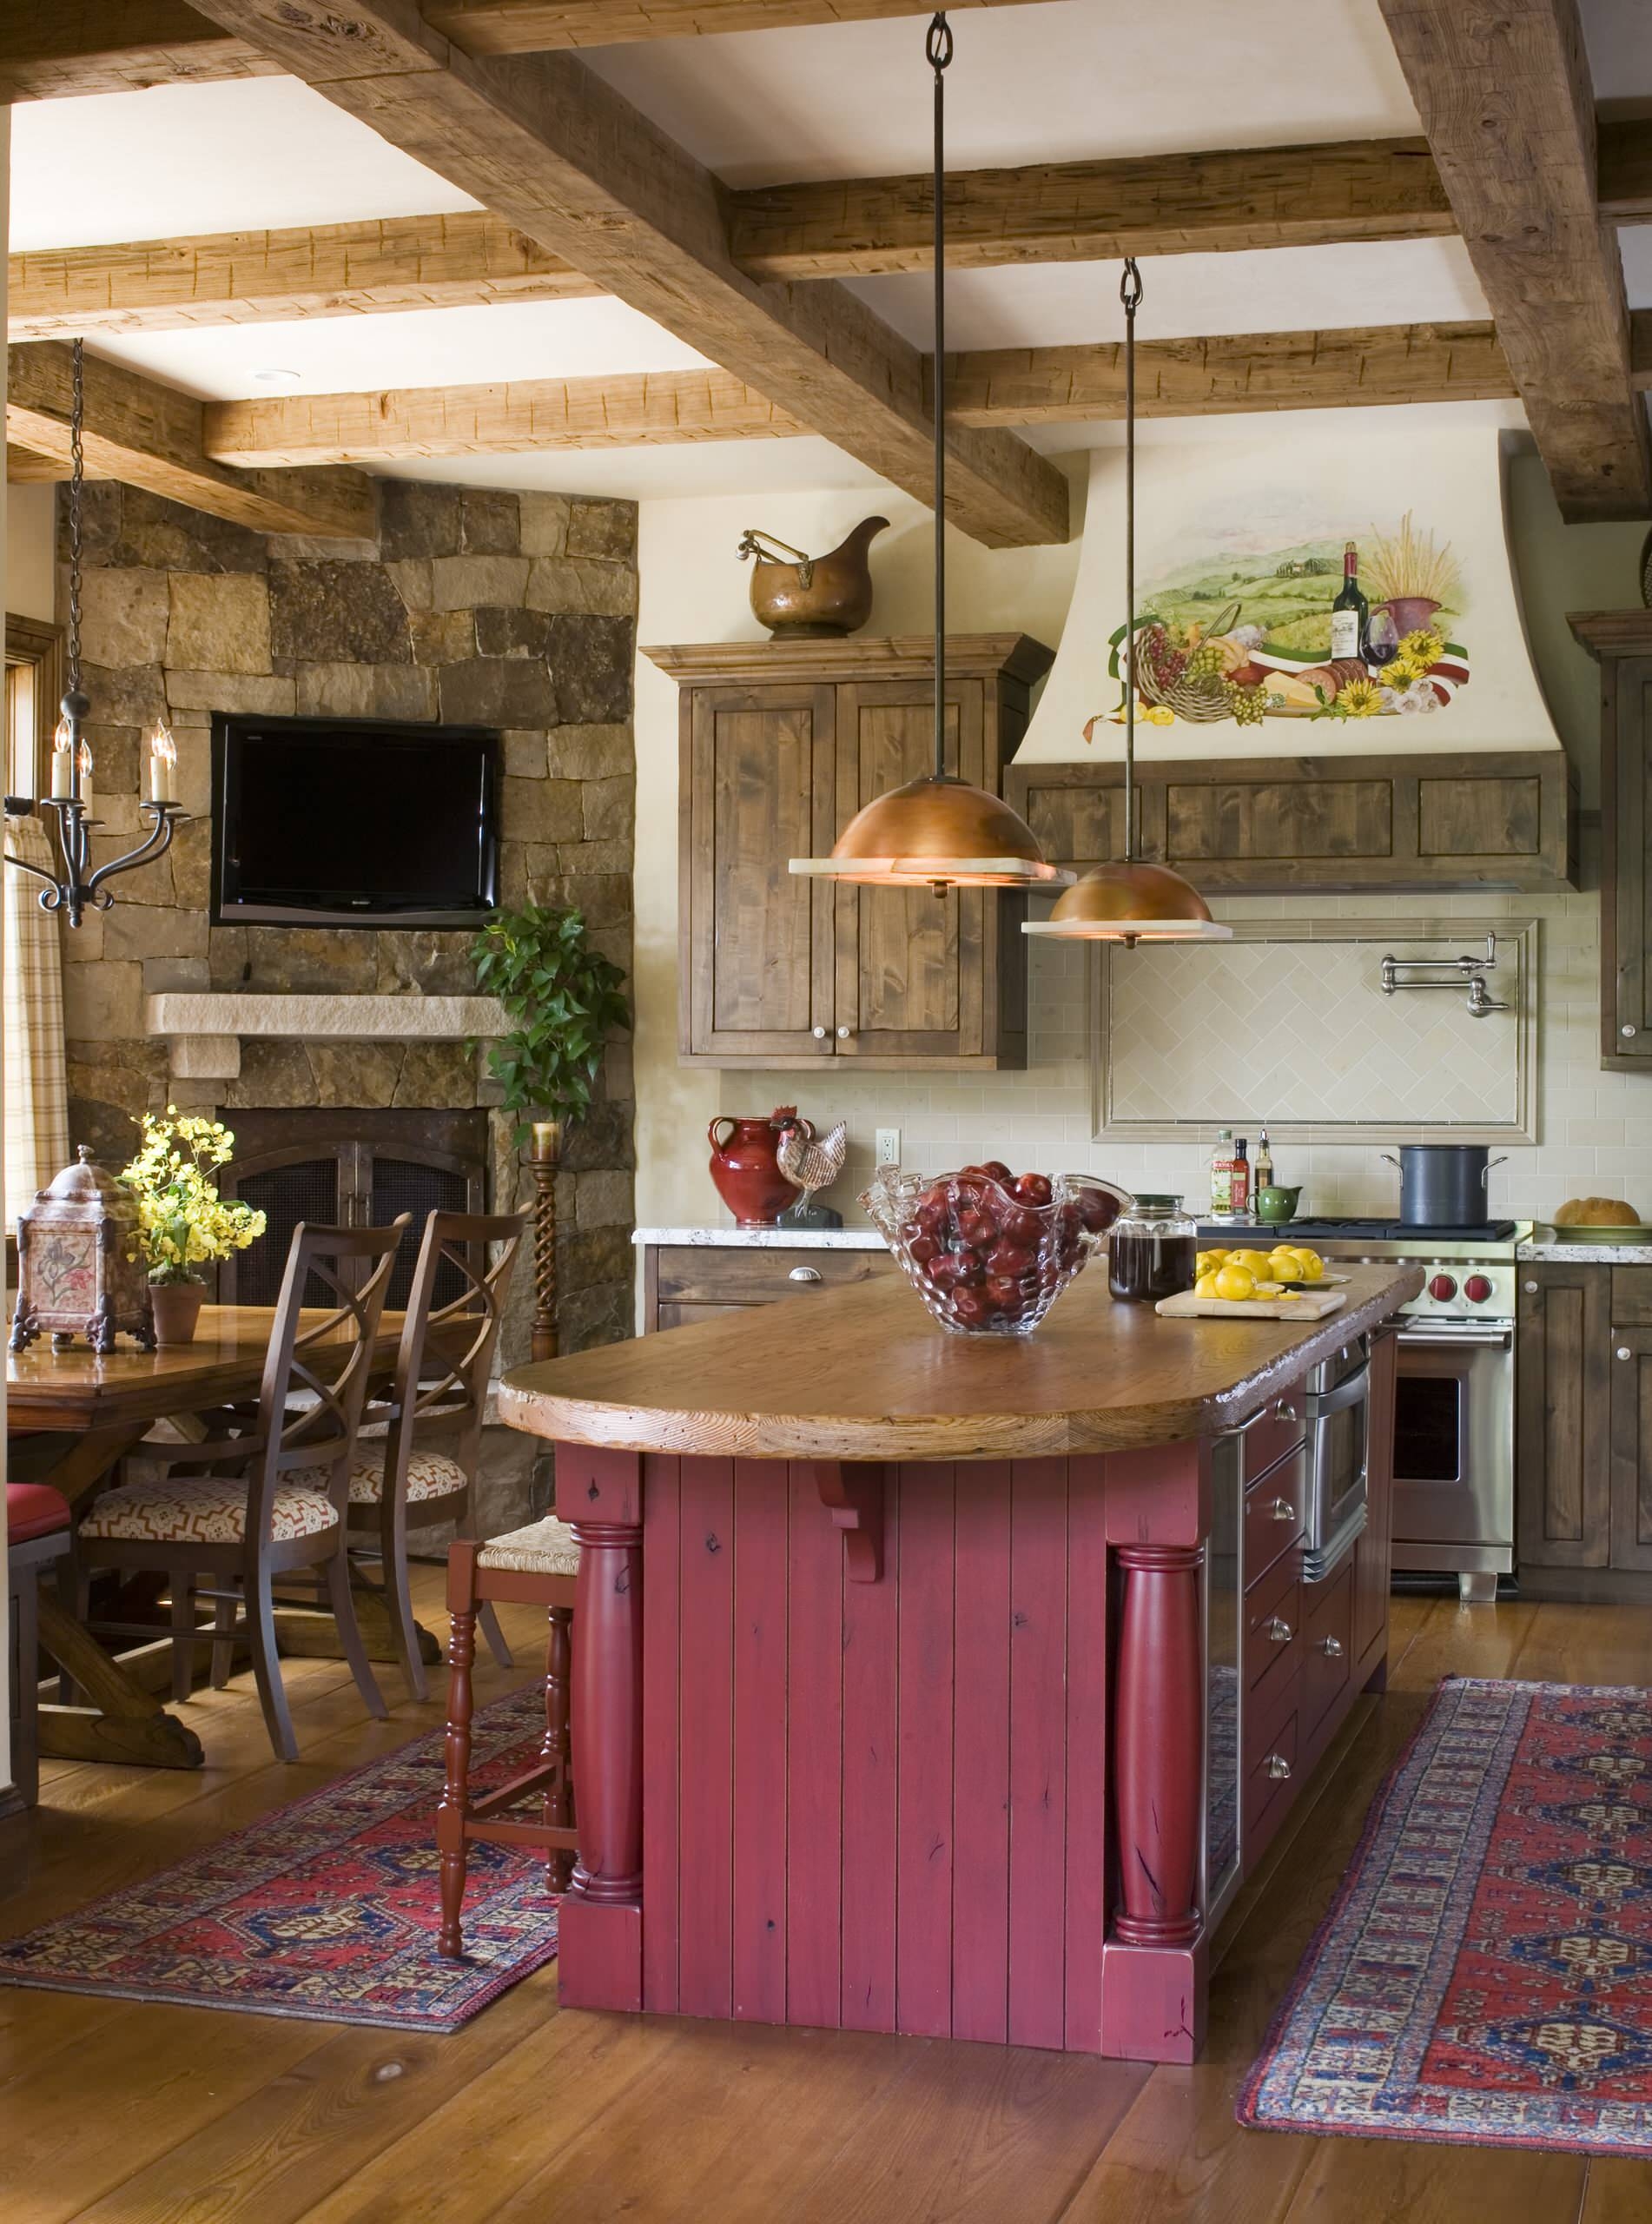 33 Small Rustic Kitchen Ideas - Foter